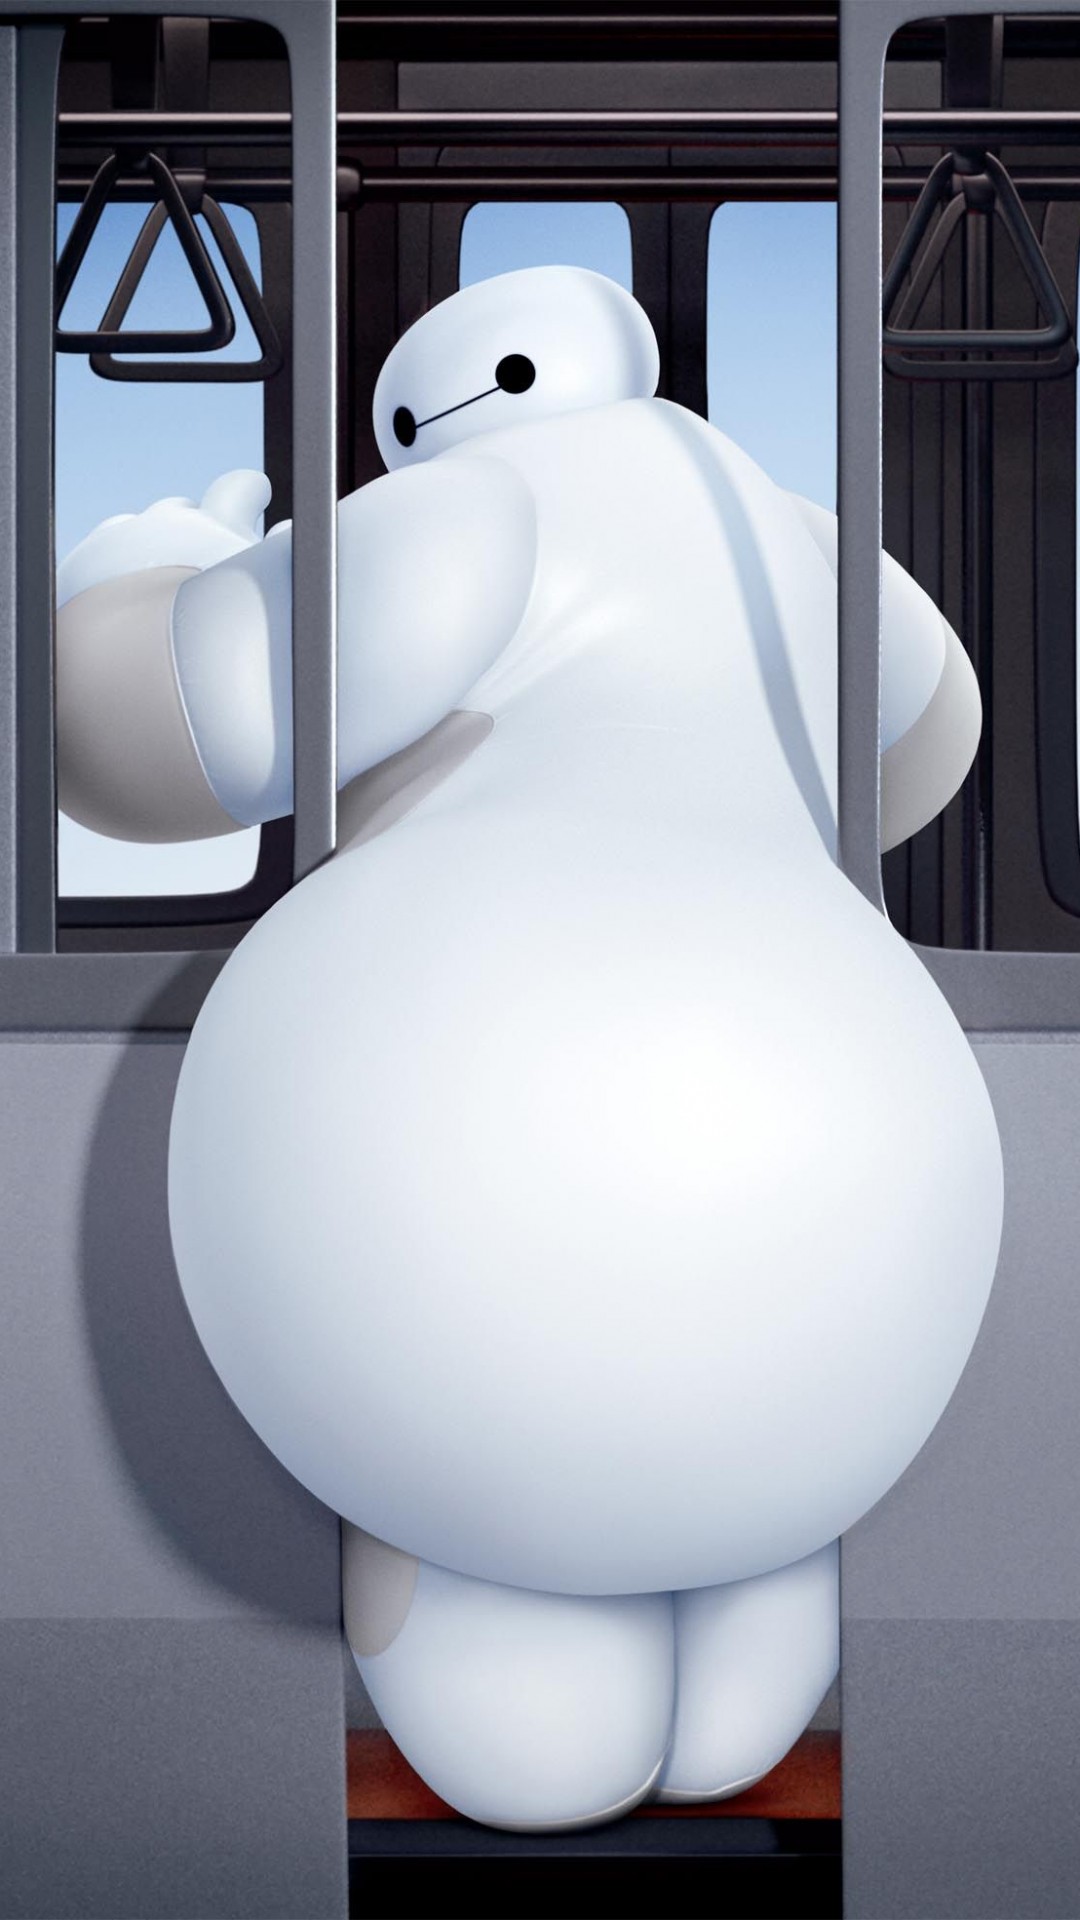 Free Download Big Hero 6 Iphone 6 6 Plus And Iphone 54 Wallpapers [1080x1920] For Your Desktop